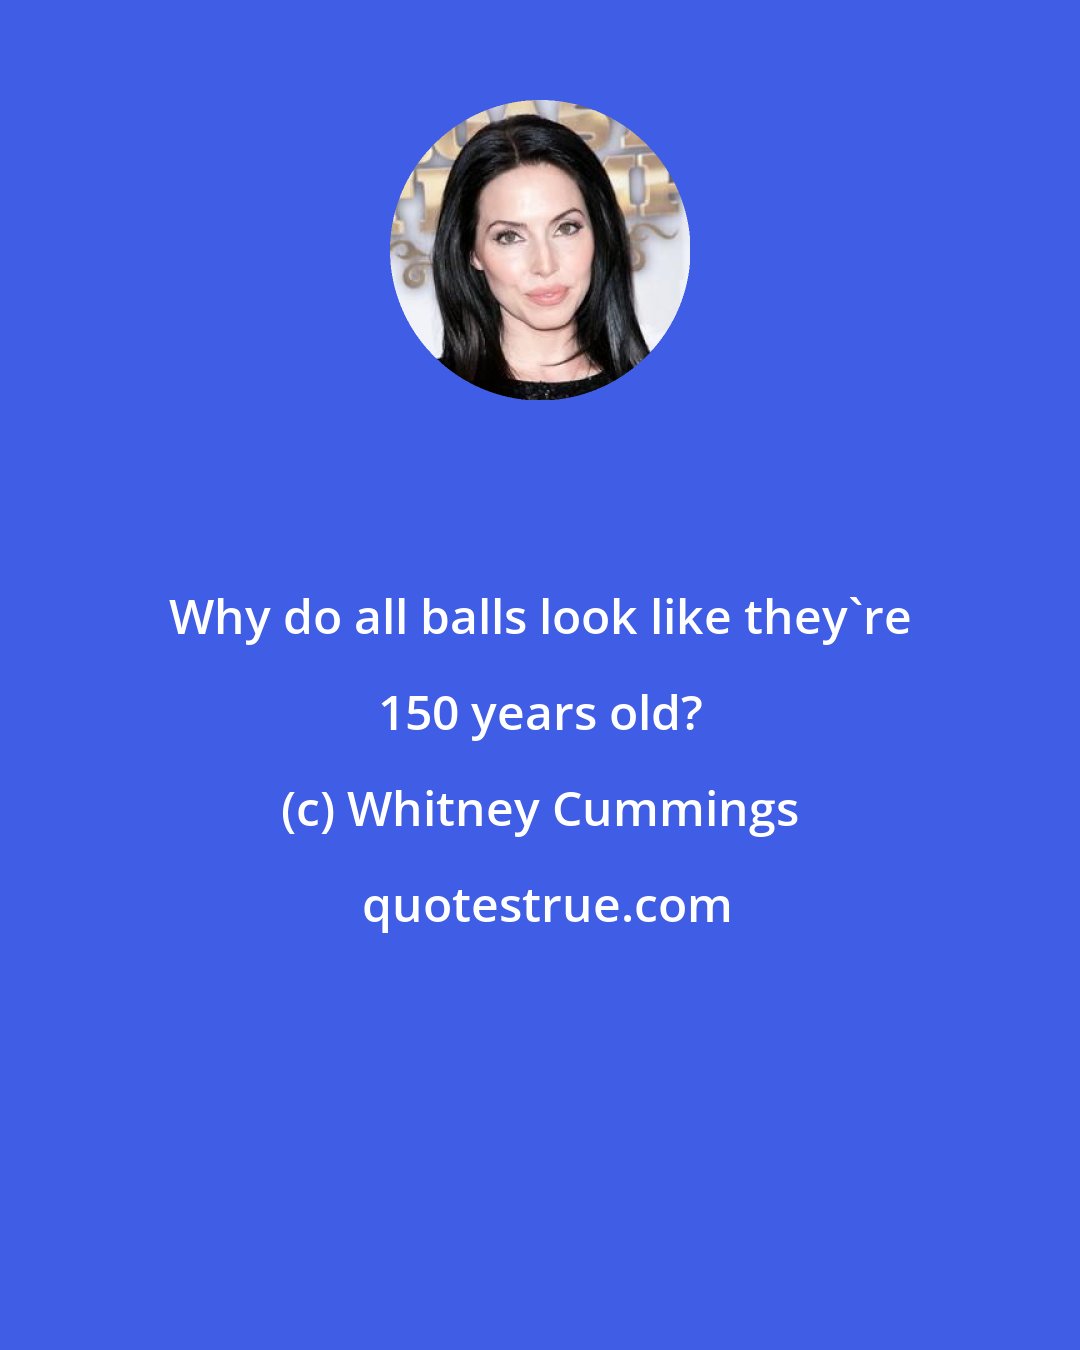 Whitney Cummings: Why do all balls look like they're 150 years old?